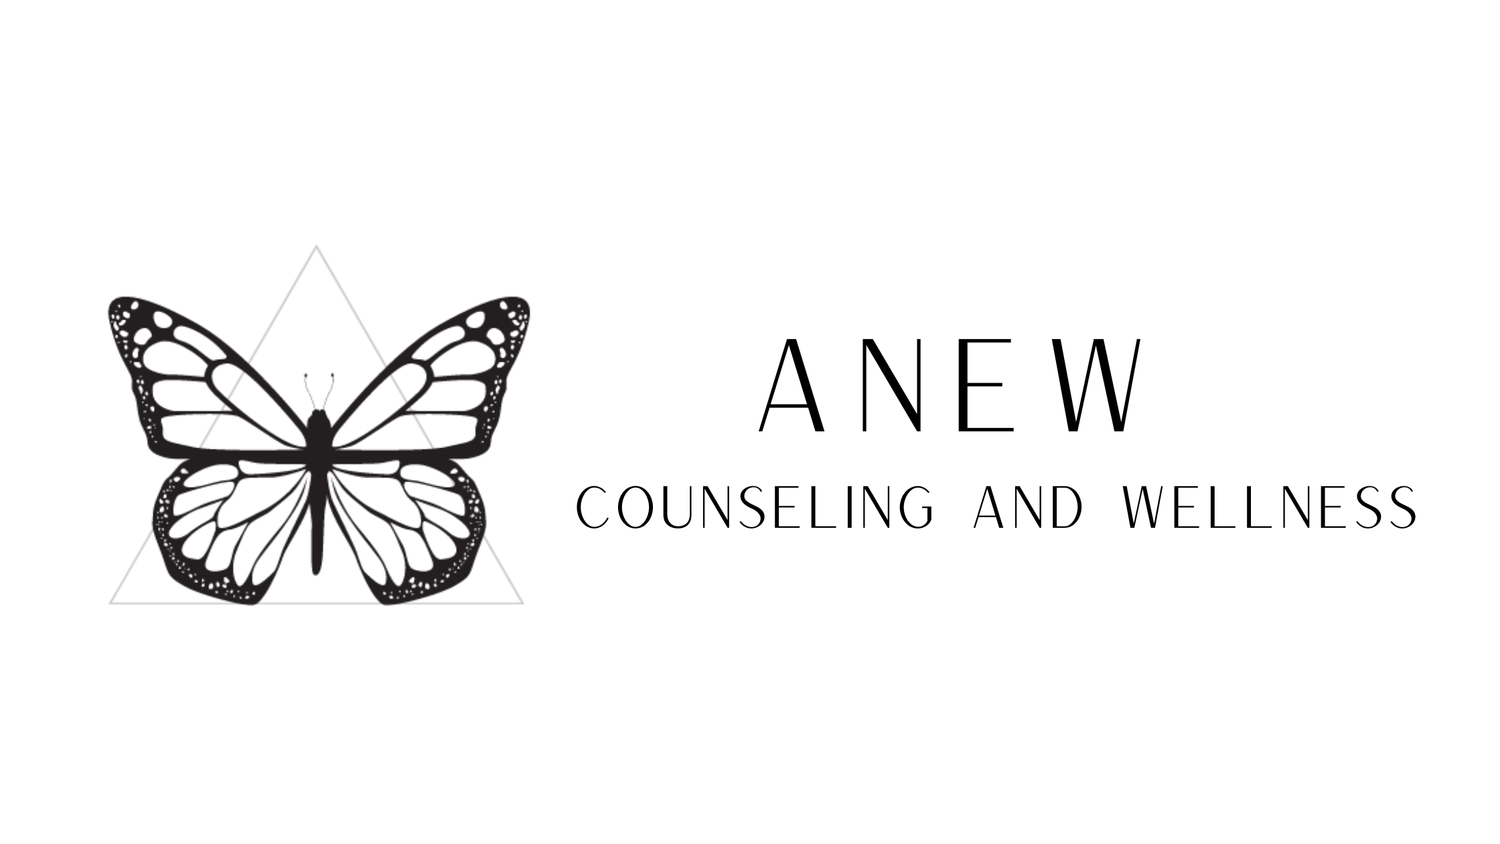 ANEW Counseling and Wellness